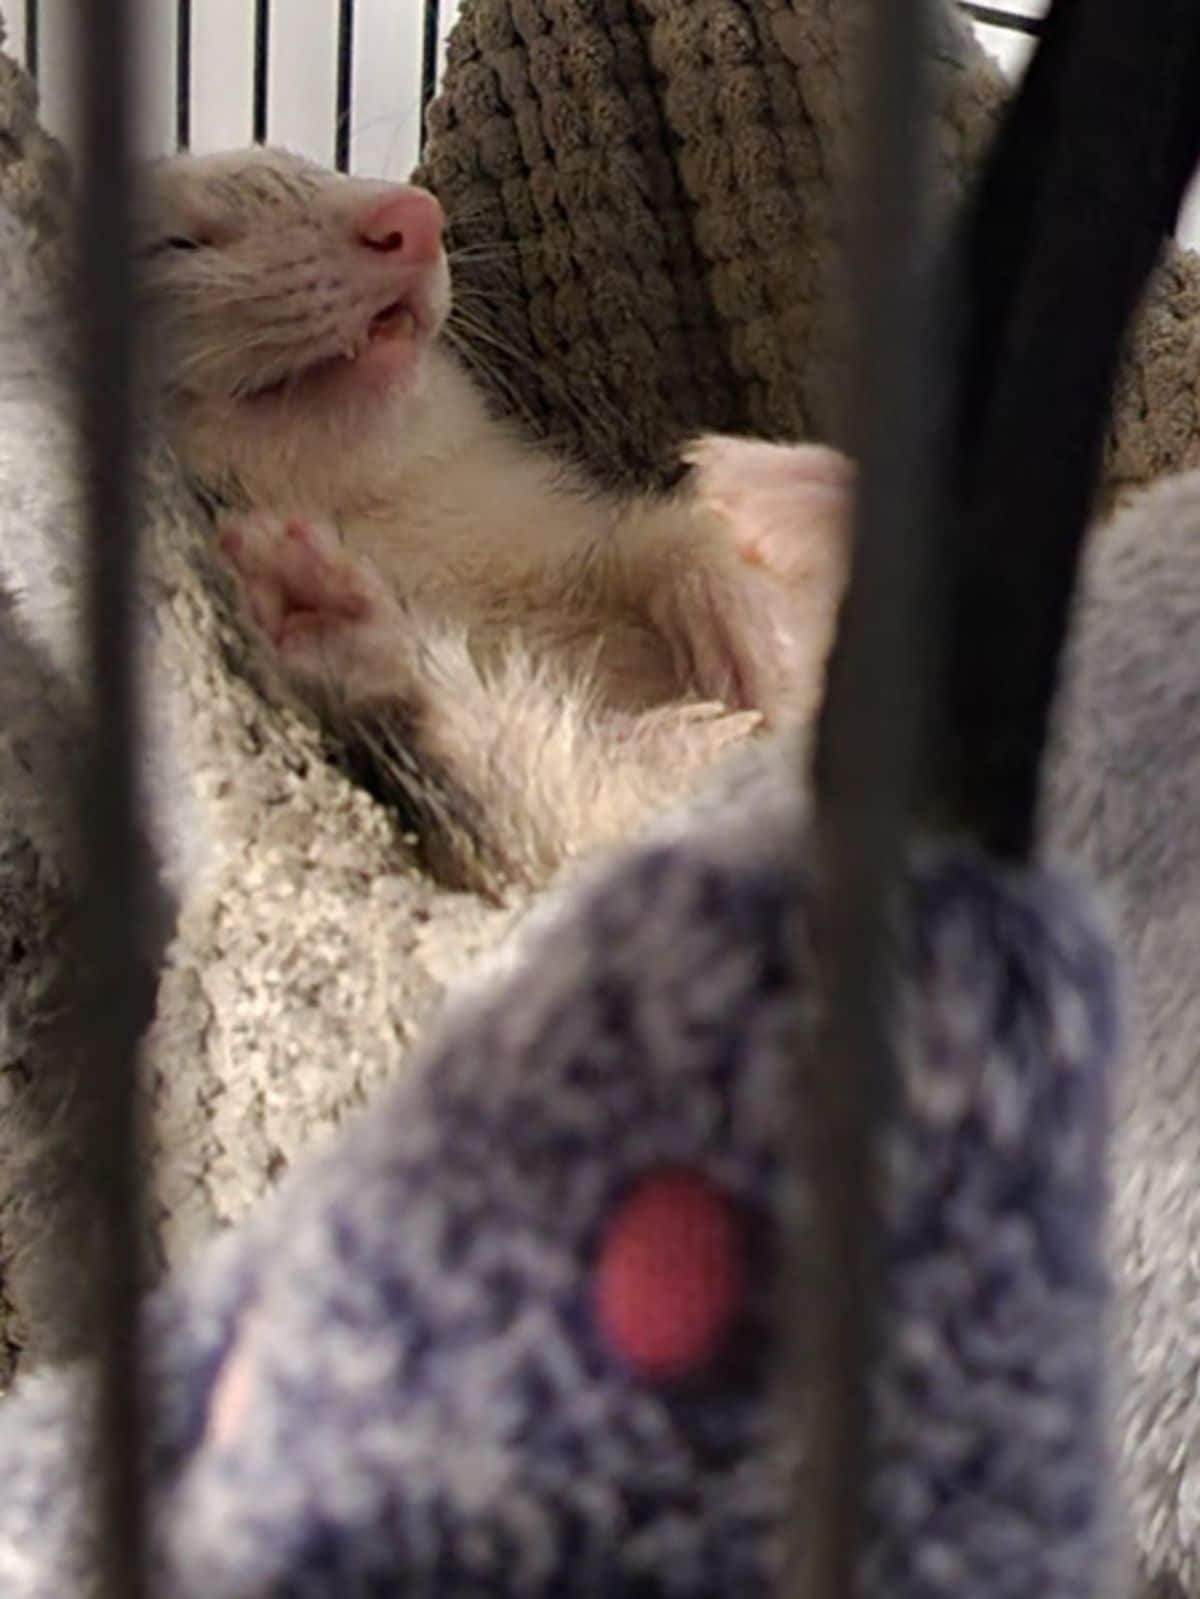 black and white ferret sleeping inside a cage on blankets with the legs splayed and the mouth slightly open showing some teeth